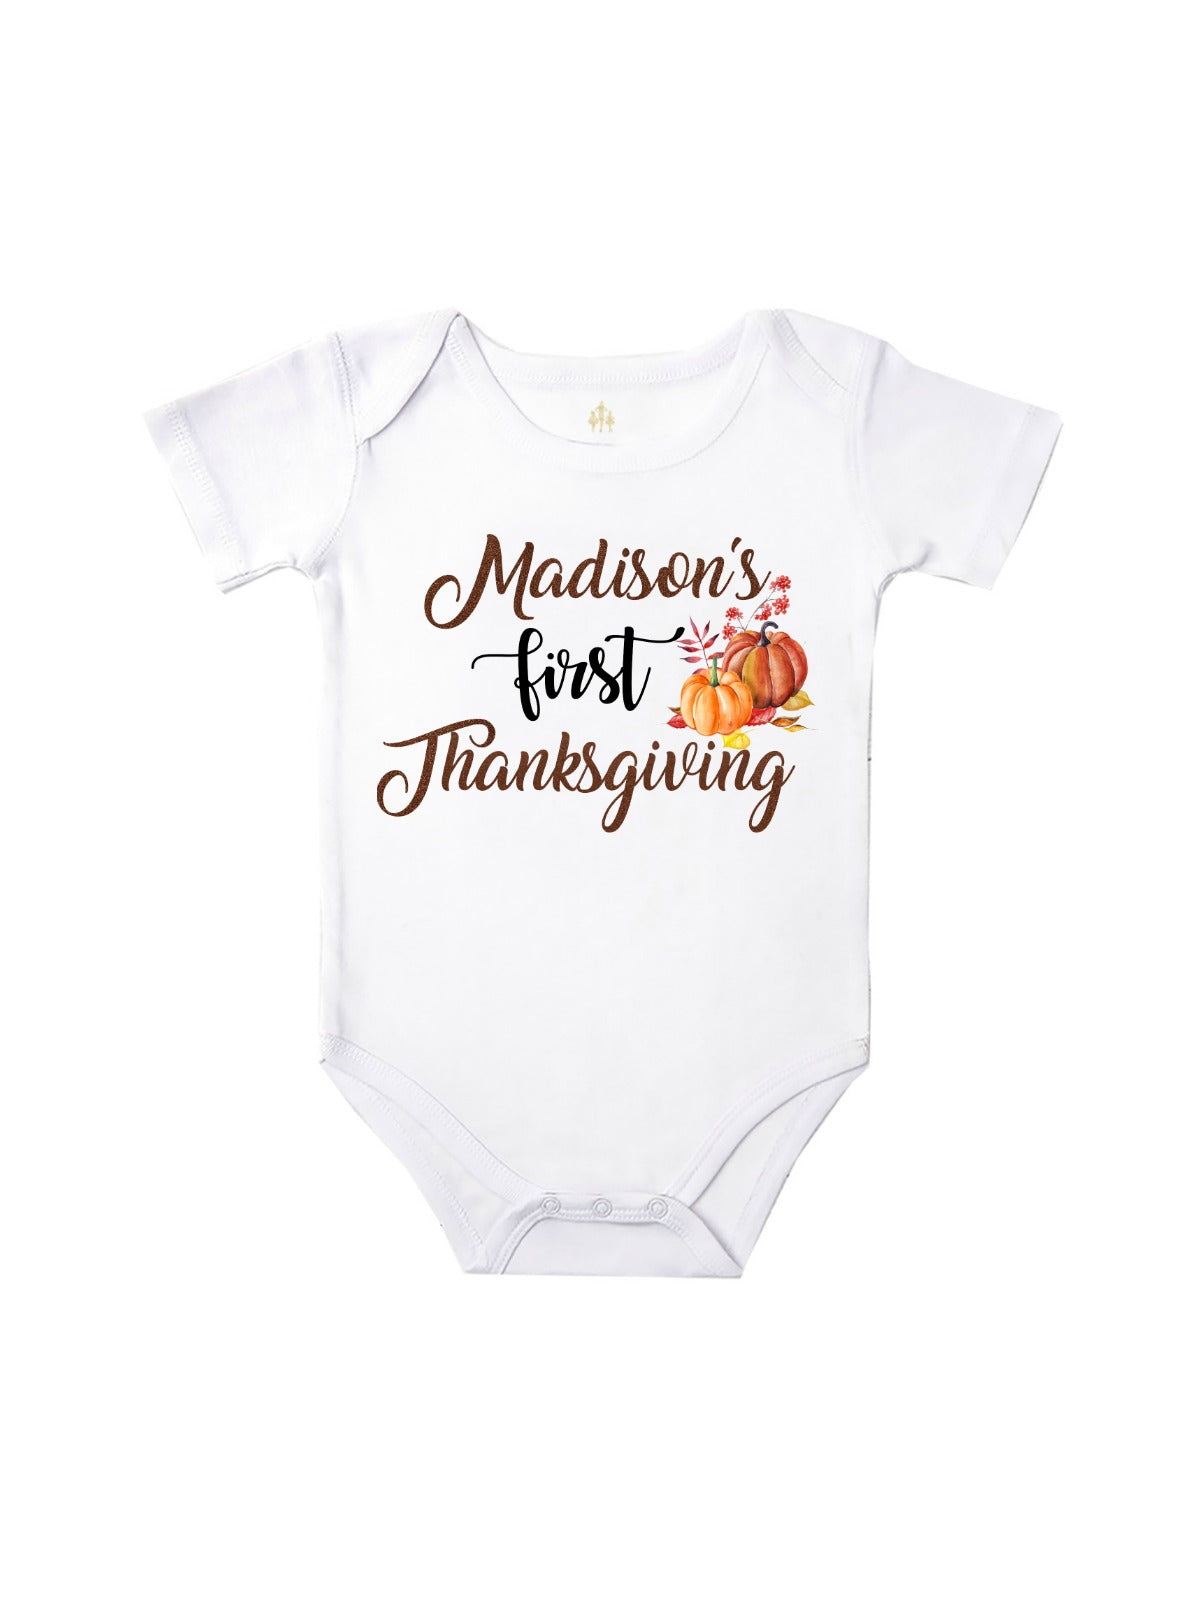 girls 1st Thanksgiving outfit personalized